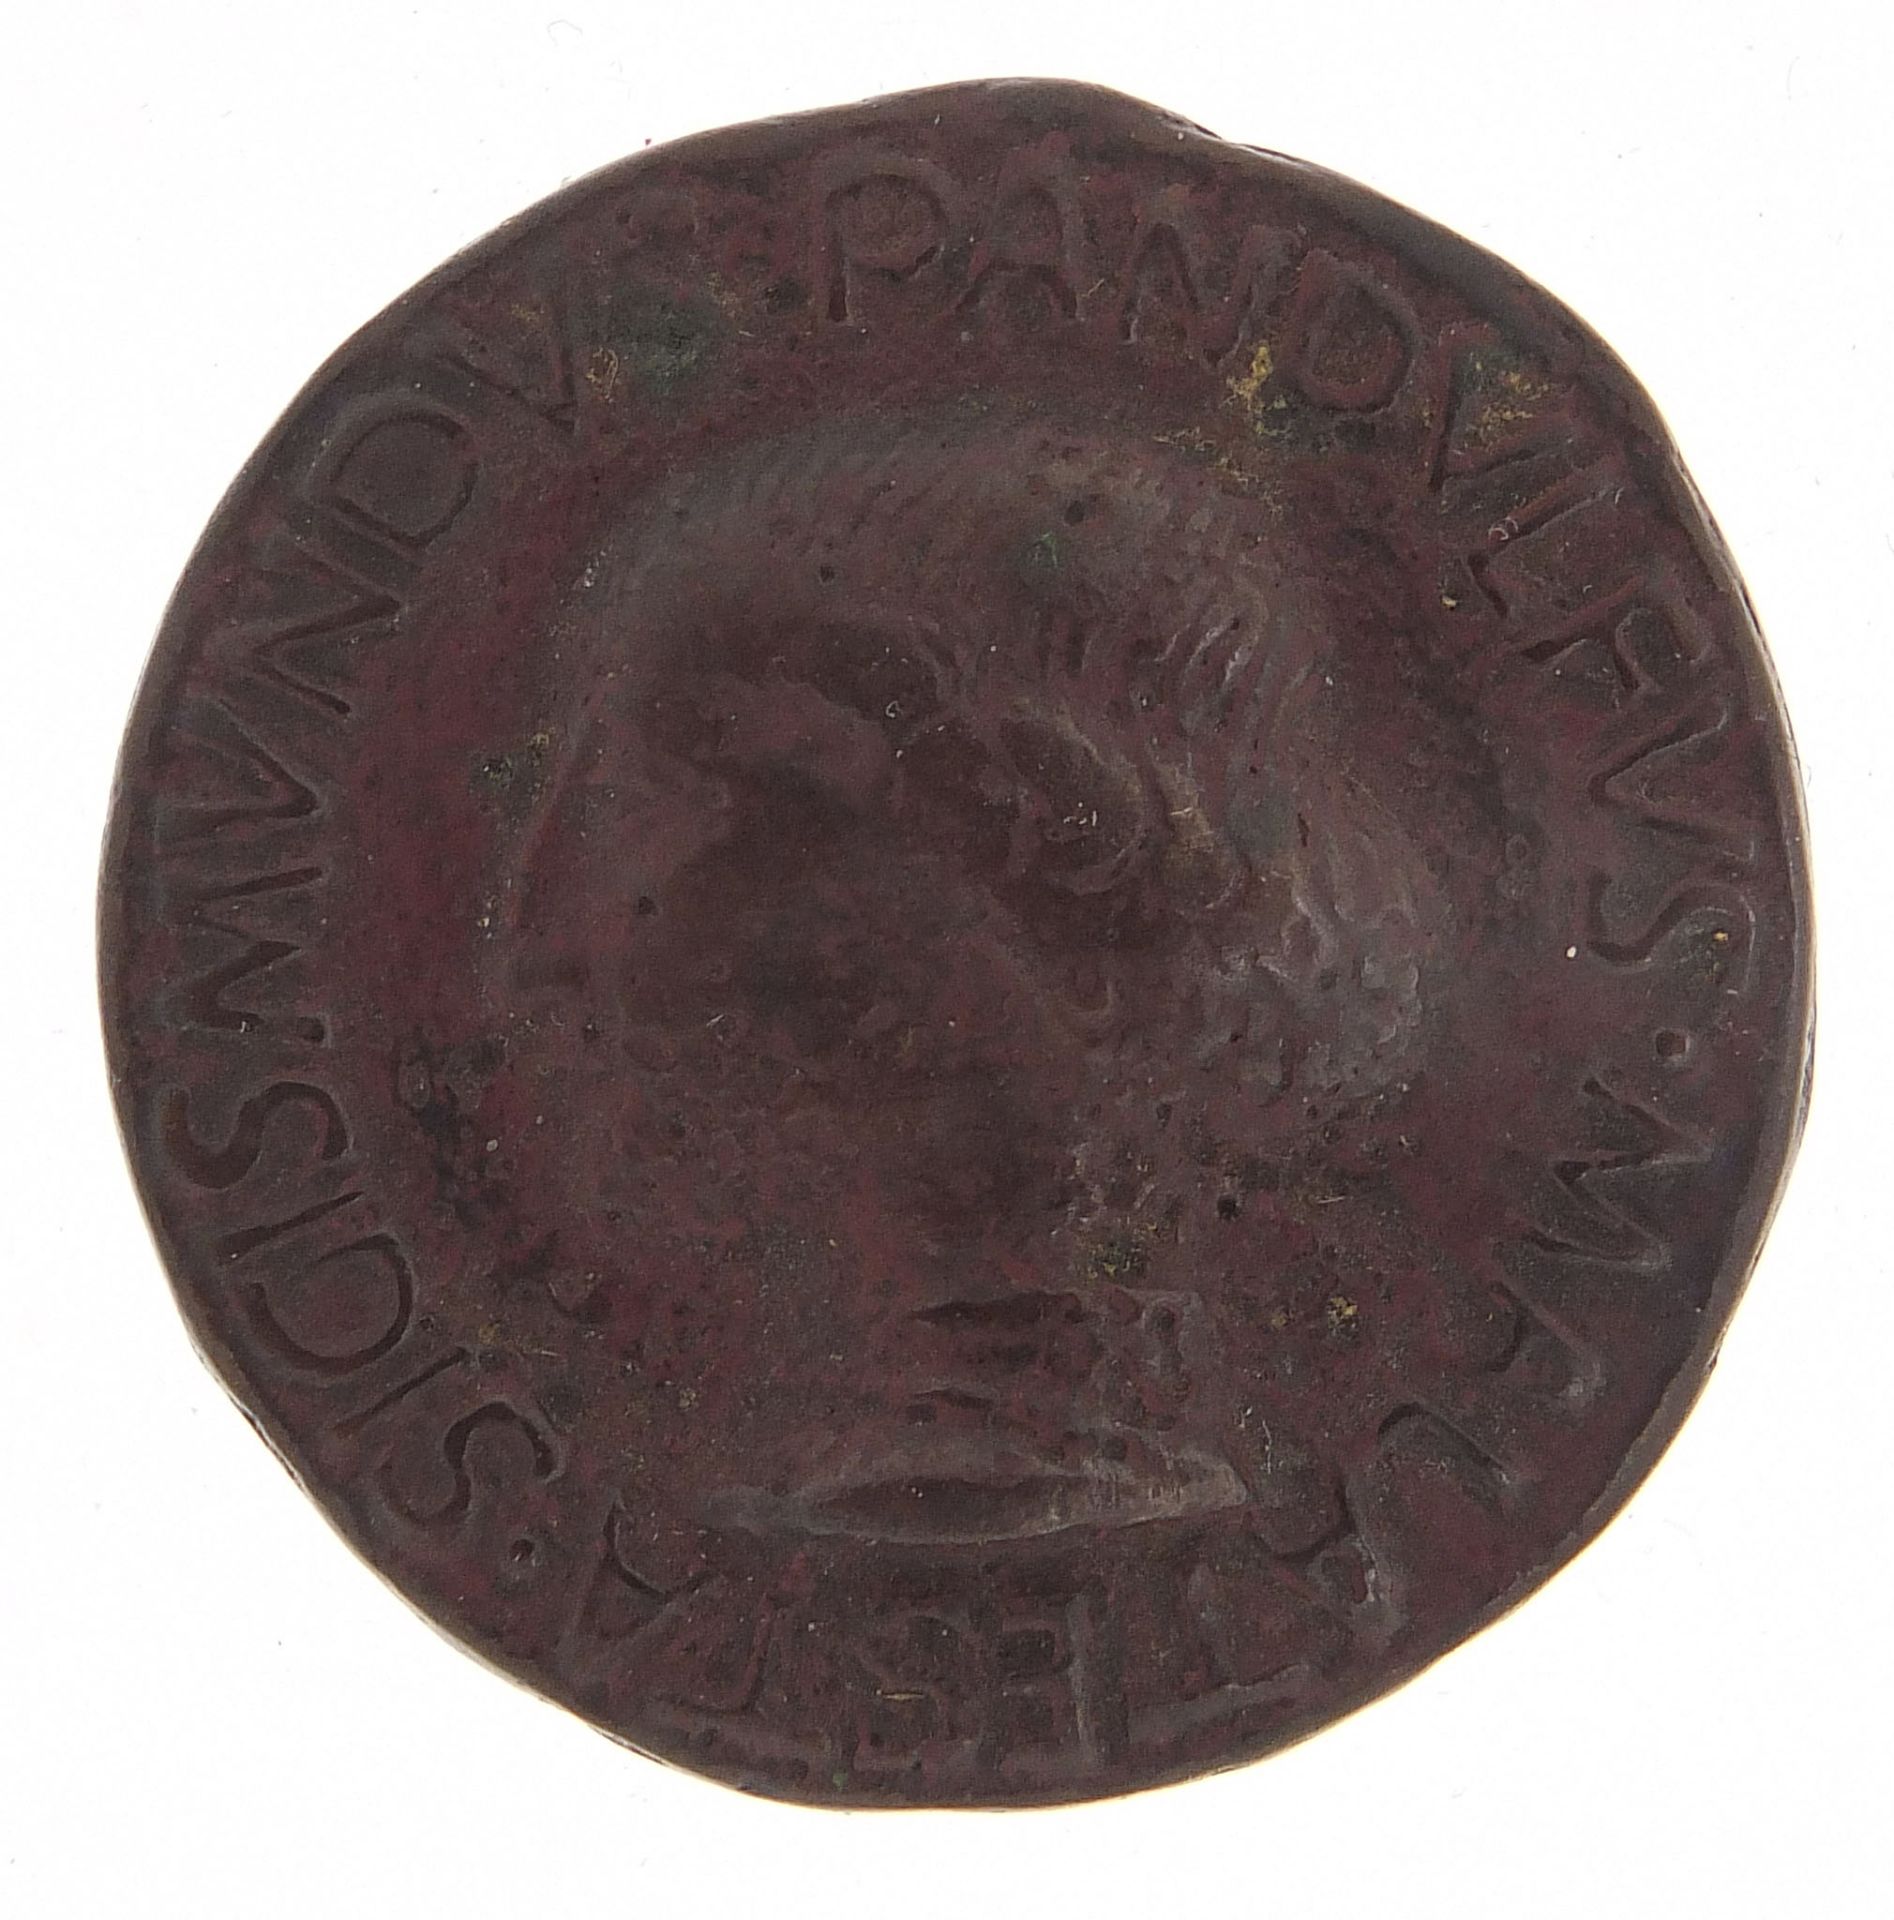 Italian medal with bust of with bust of Matteo De Pasti, dated 1447, 31mm in diameter